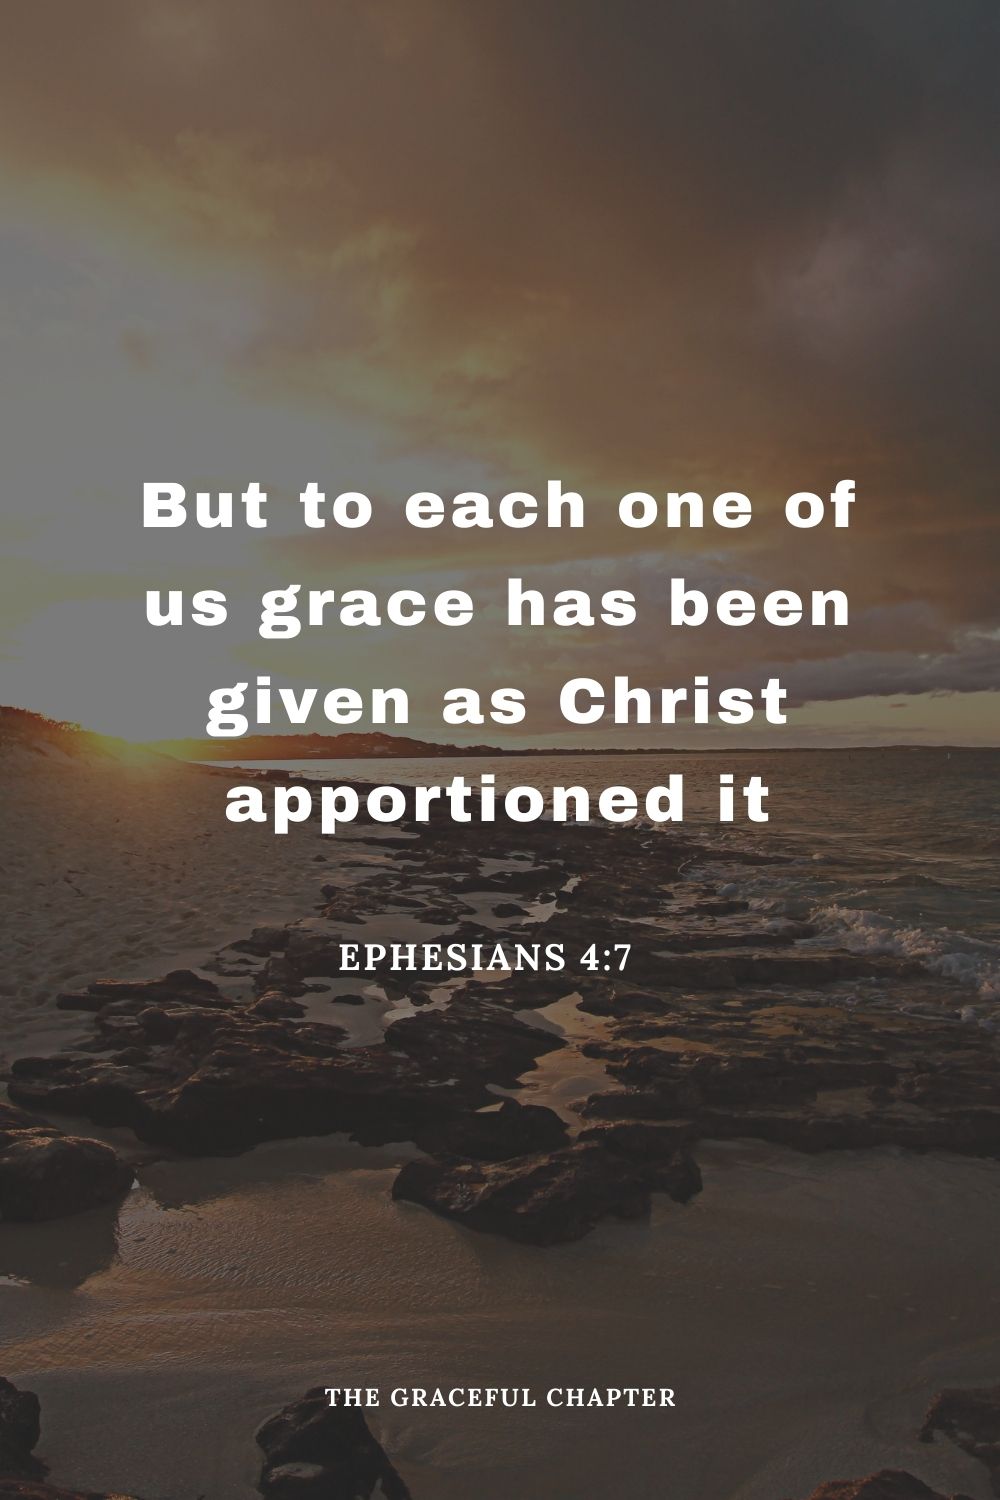 But to each one of us grace has been given as Christ apportioned it